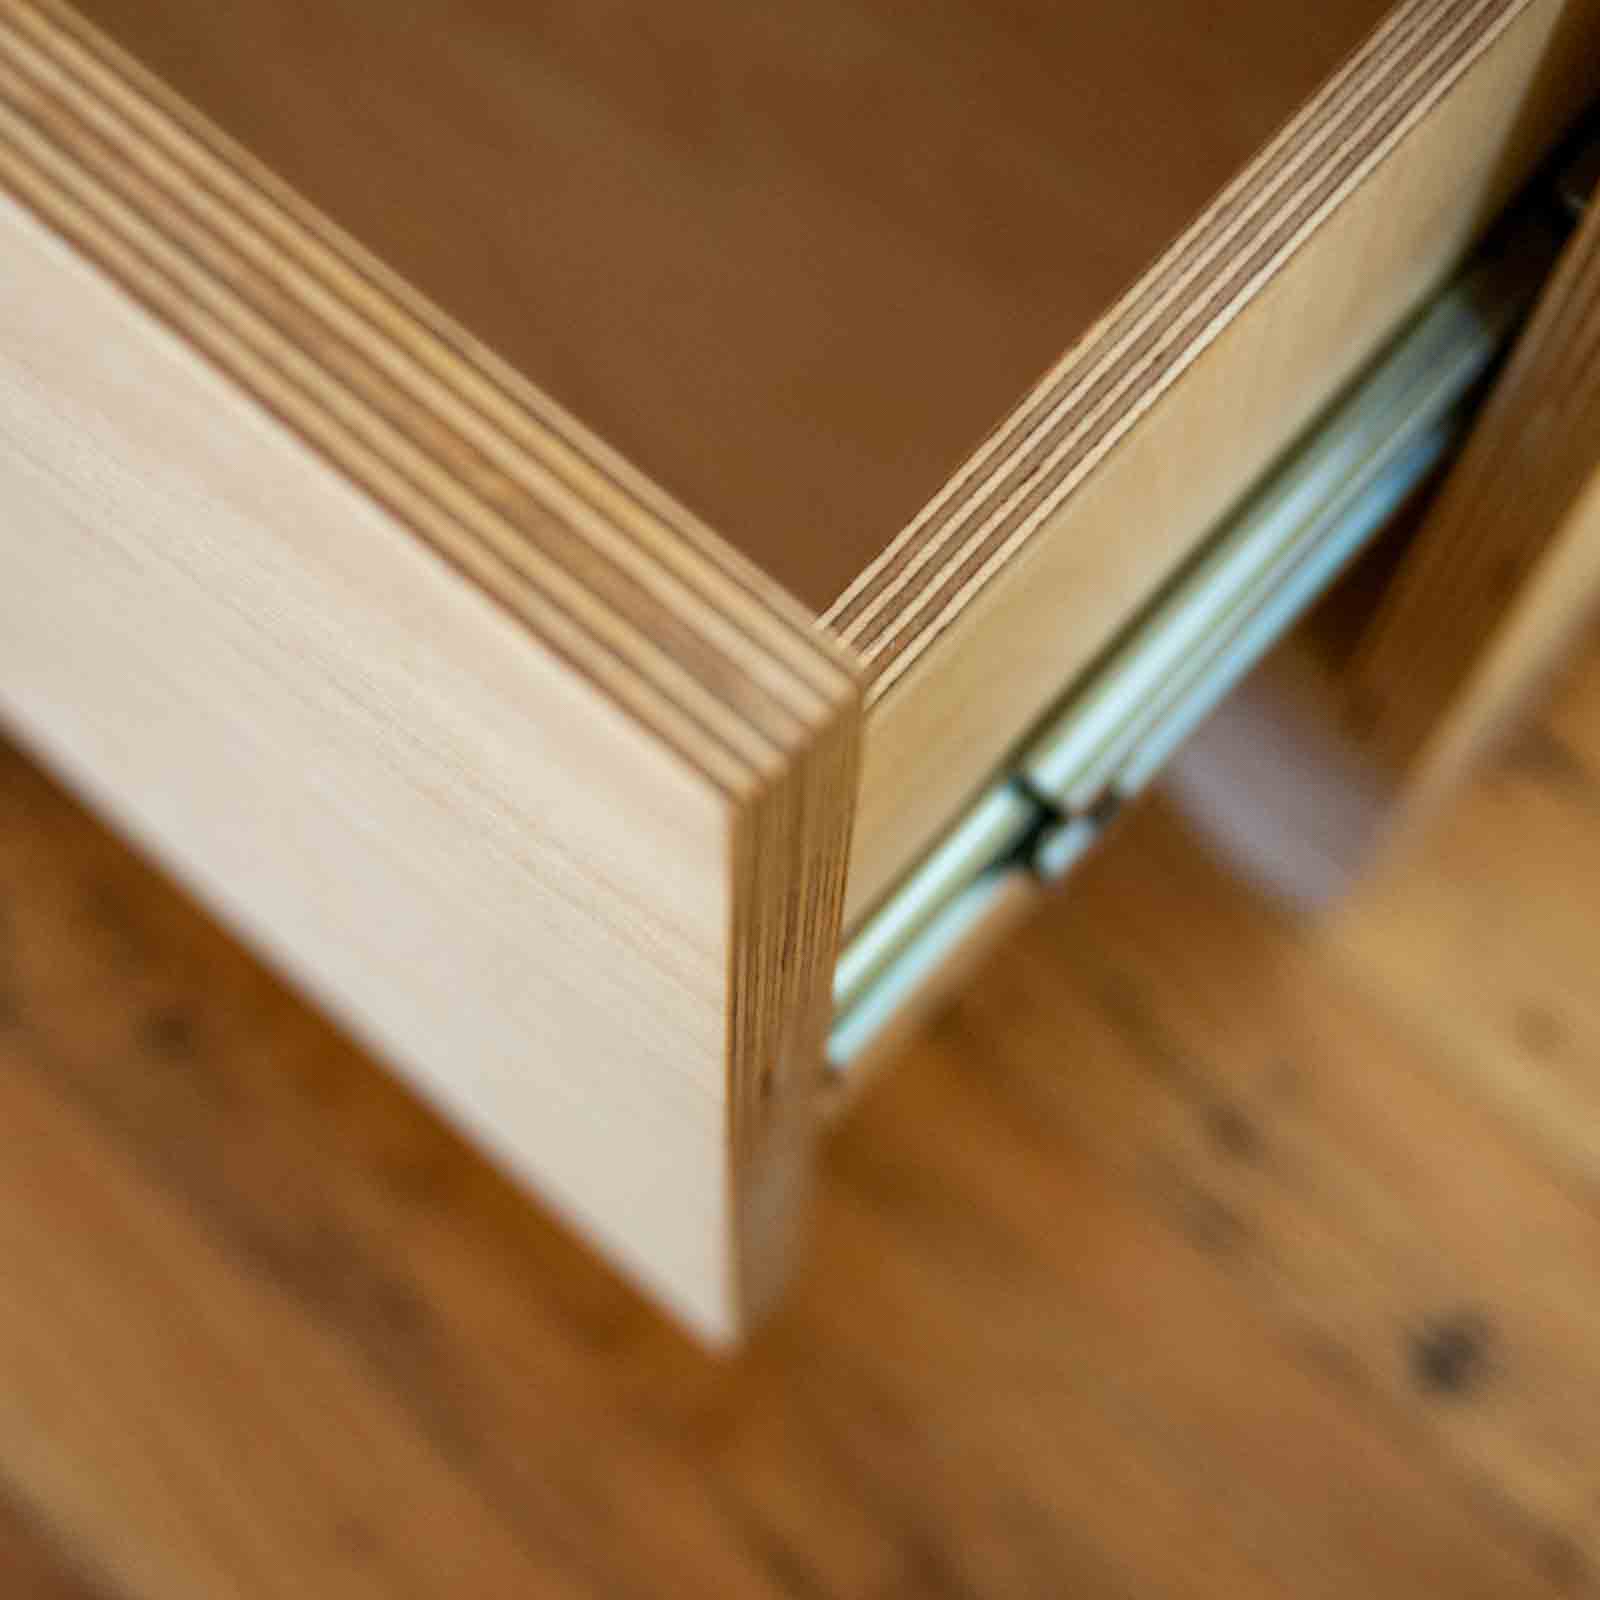 Detail photo of opened empty dresser drawer showing interior build and drawer slides